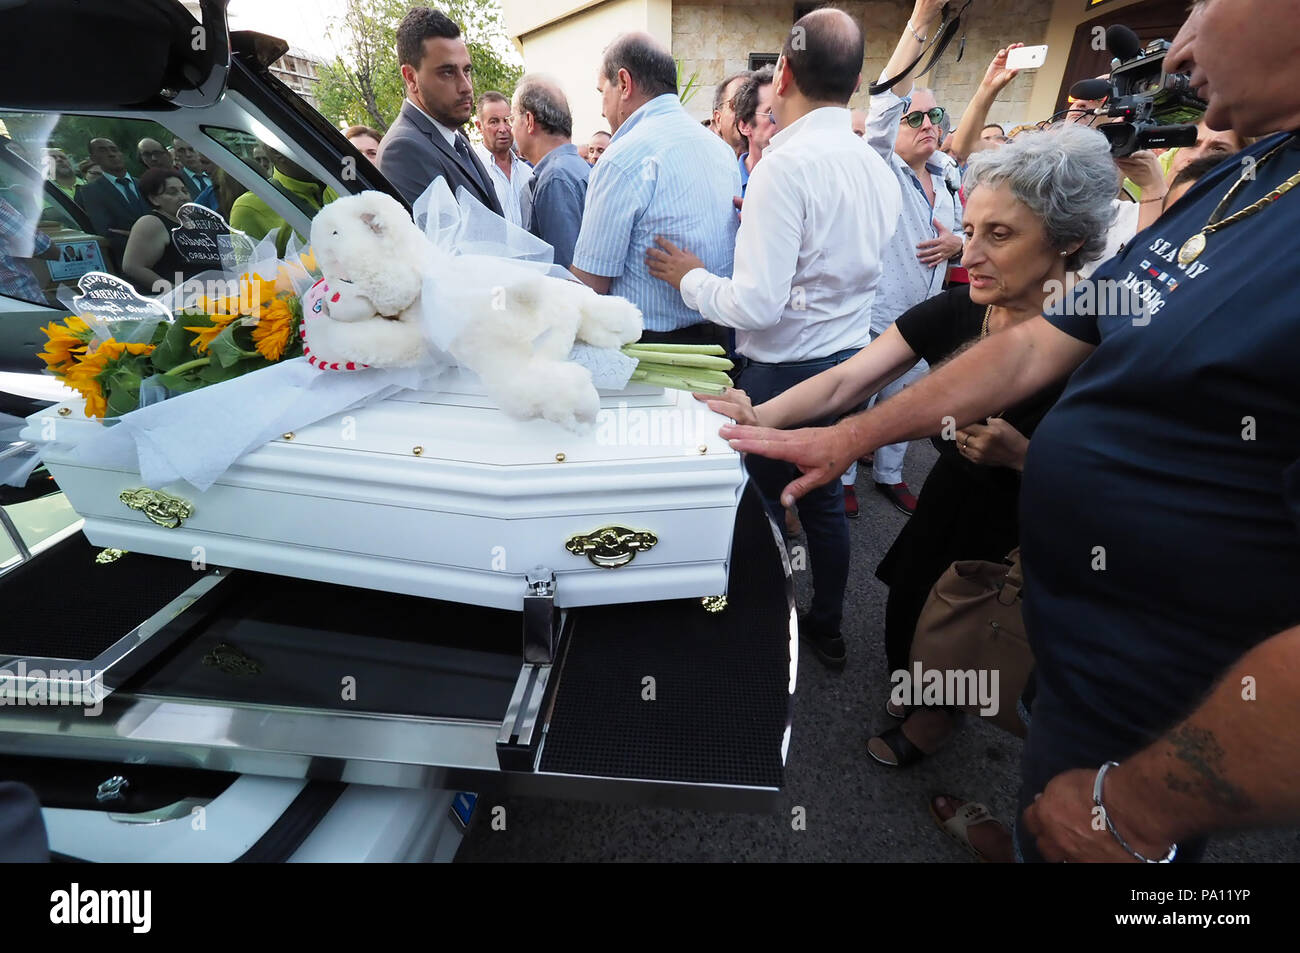 Rossano, Italy. 19th July, 2018. Rossano, the funeral of Stanislao Acri, a 35-year-old lawyer, his wife Daria Stella Olivo, aged 35, and their little 6-month-old Pier Antonio Acri, who died on 15 July in a terrible accident on the A1 near Frosinone. They were coming back from Rome on board their Fiat Punto and were hit by a van. Stanislao Acri had been nominated for mayor of Rossano for the Movimento 5 Stelle.19/07/2018, Rossano, Italy Credit: Independent Photo Agency Srl/Alamy Live News Stock Photo